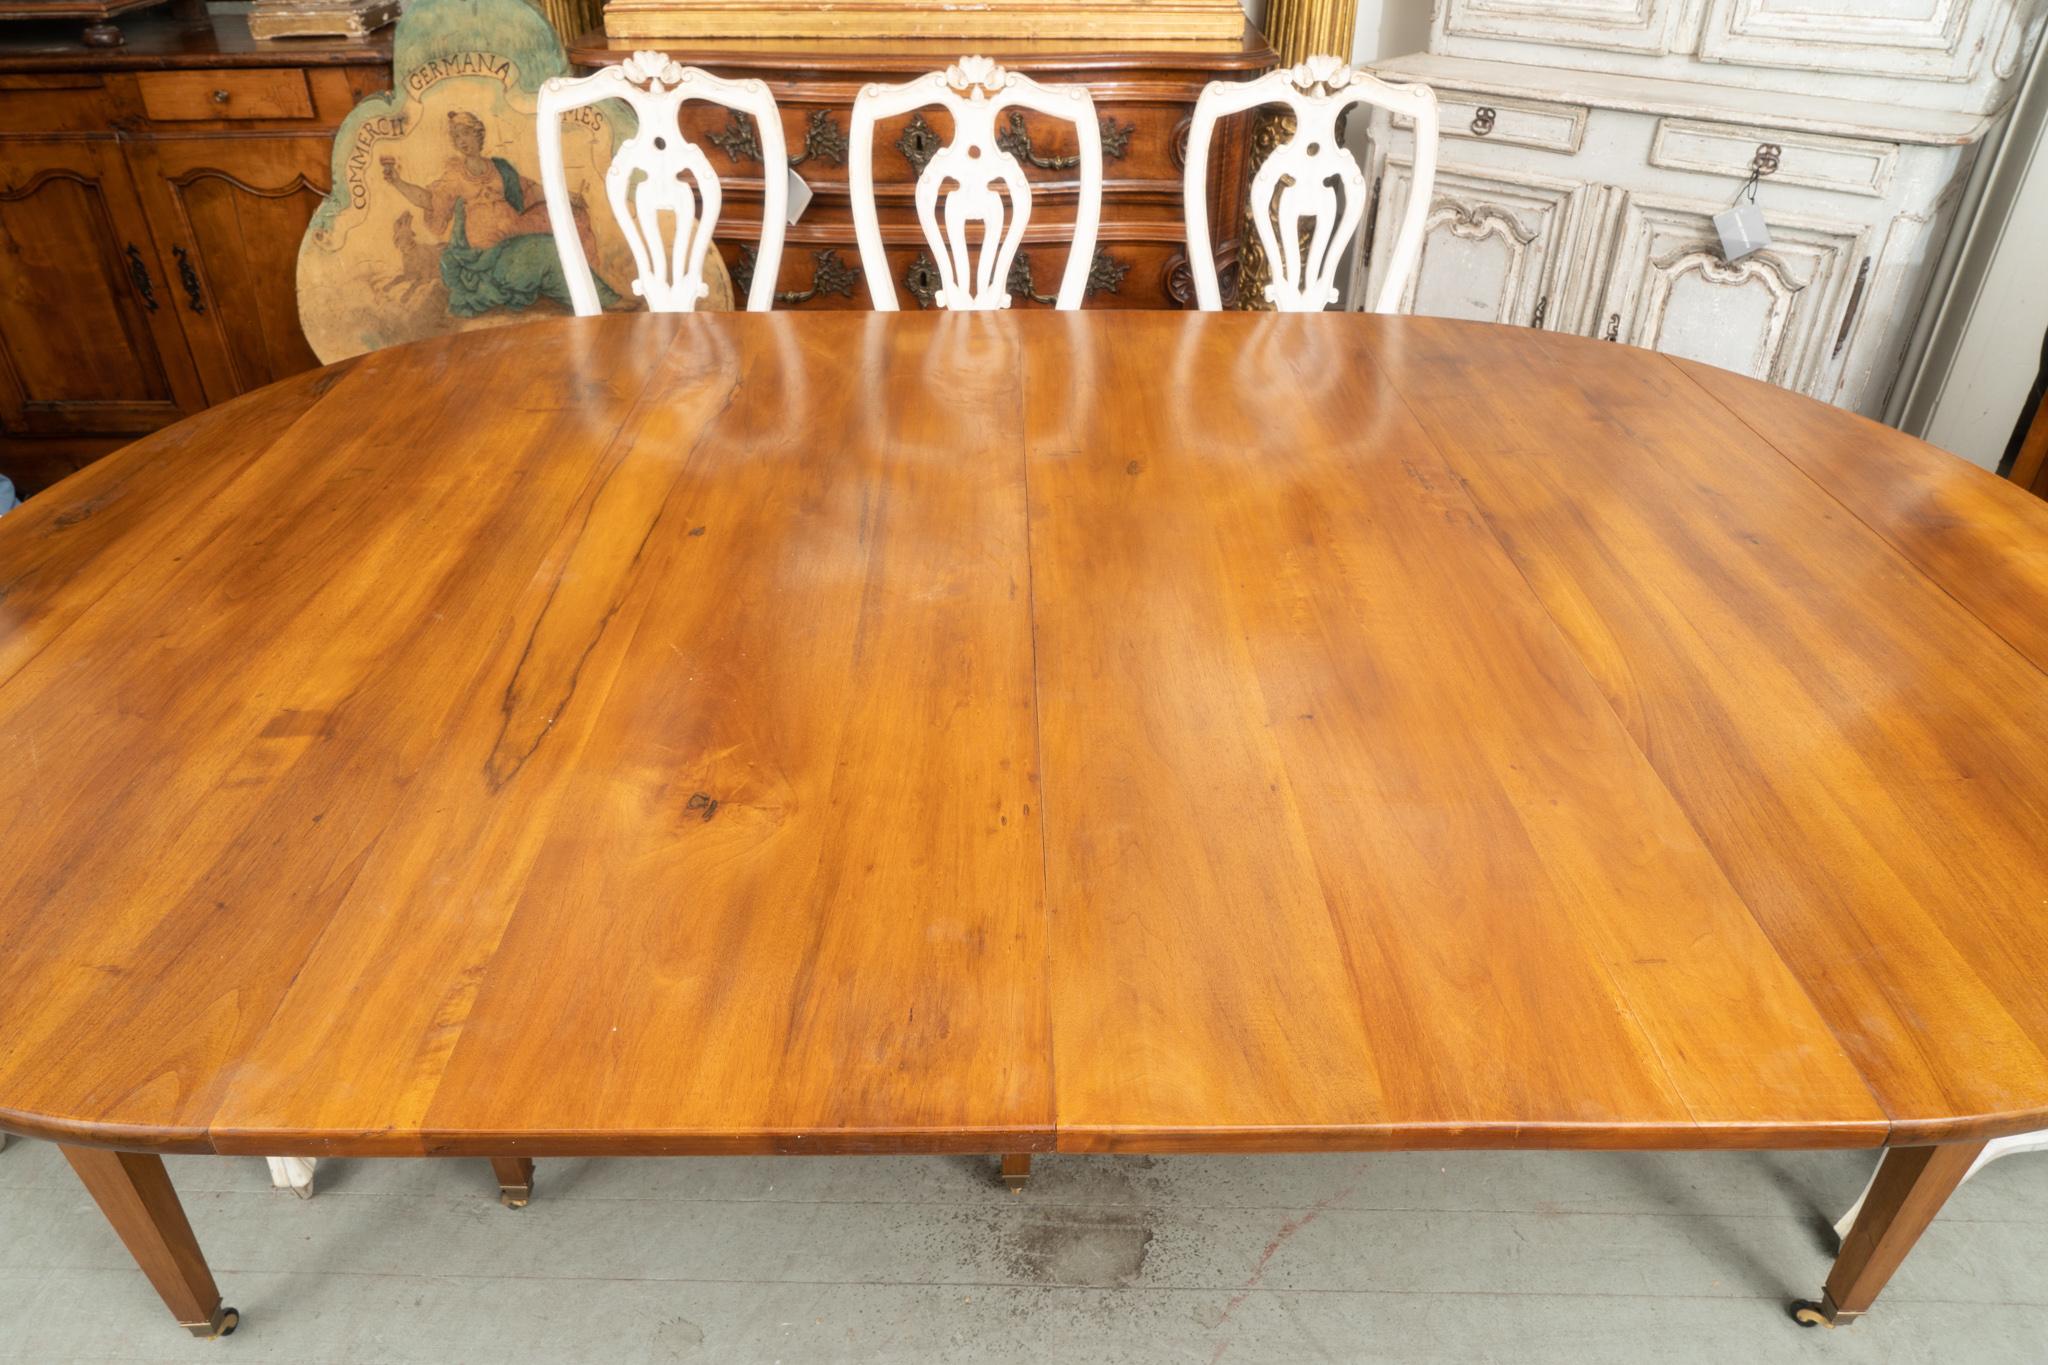 Beautiful period directoire walnut extension table shown with two leaves. There are three extra finished leaves each adding 19.5” to the total length.